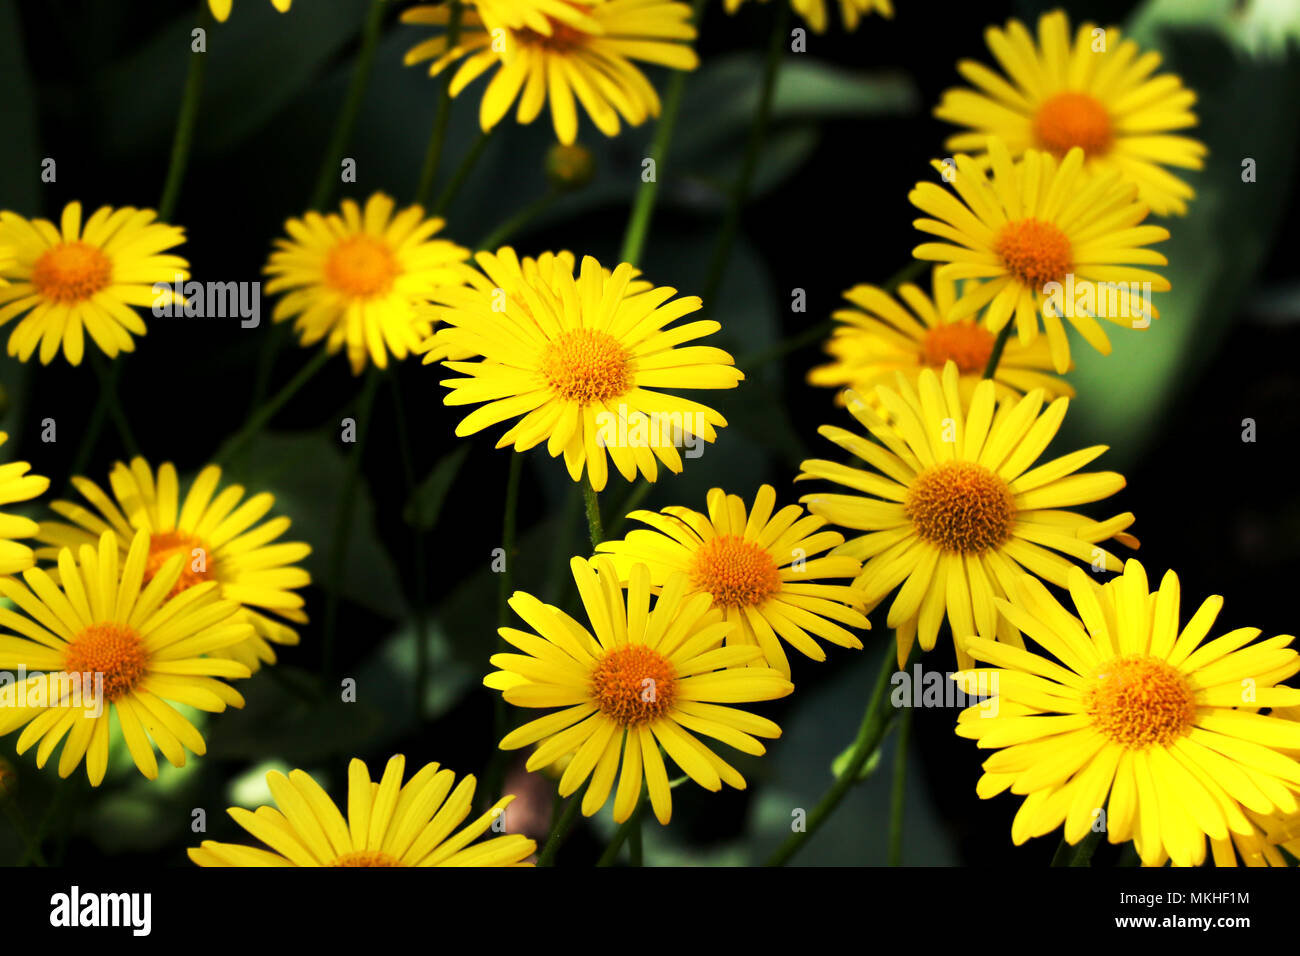 large flower bed of beautiful yellow daisies with large petals Stock Photo